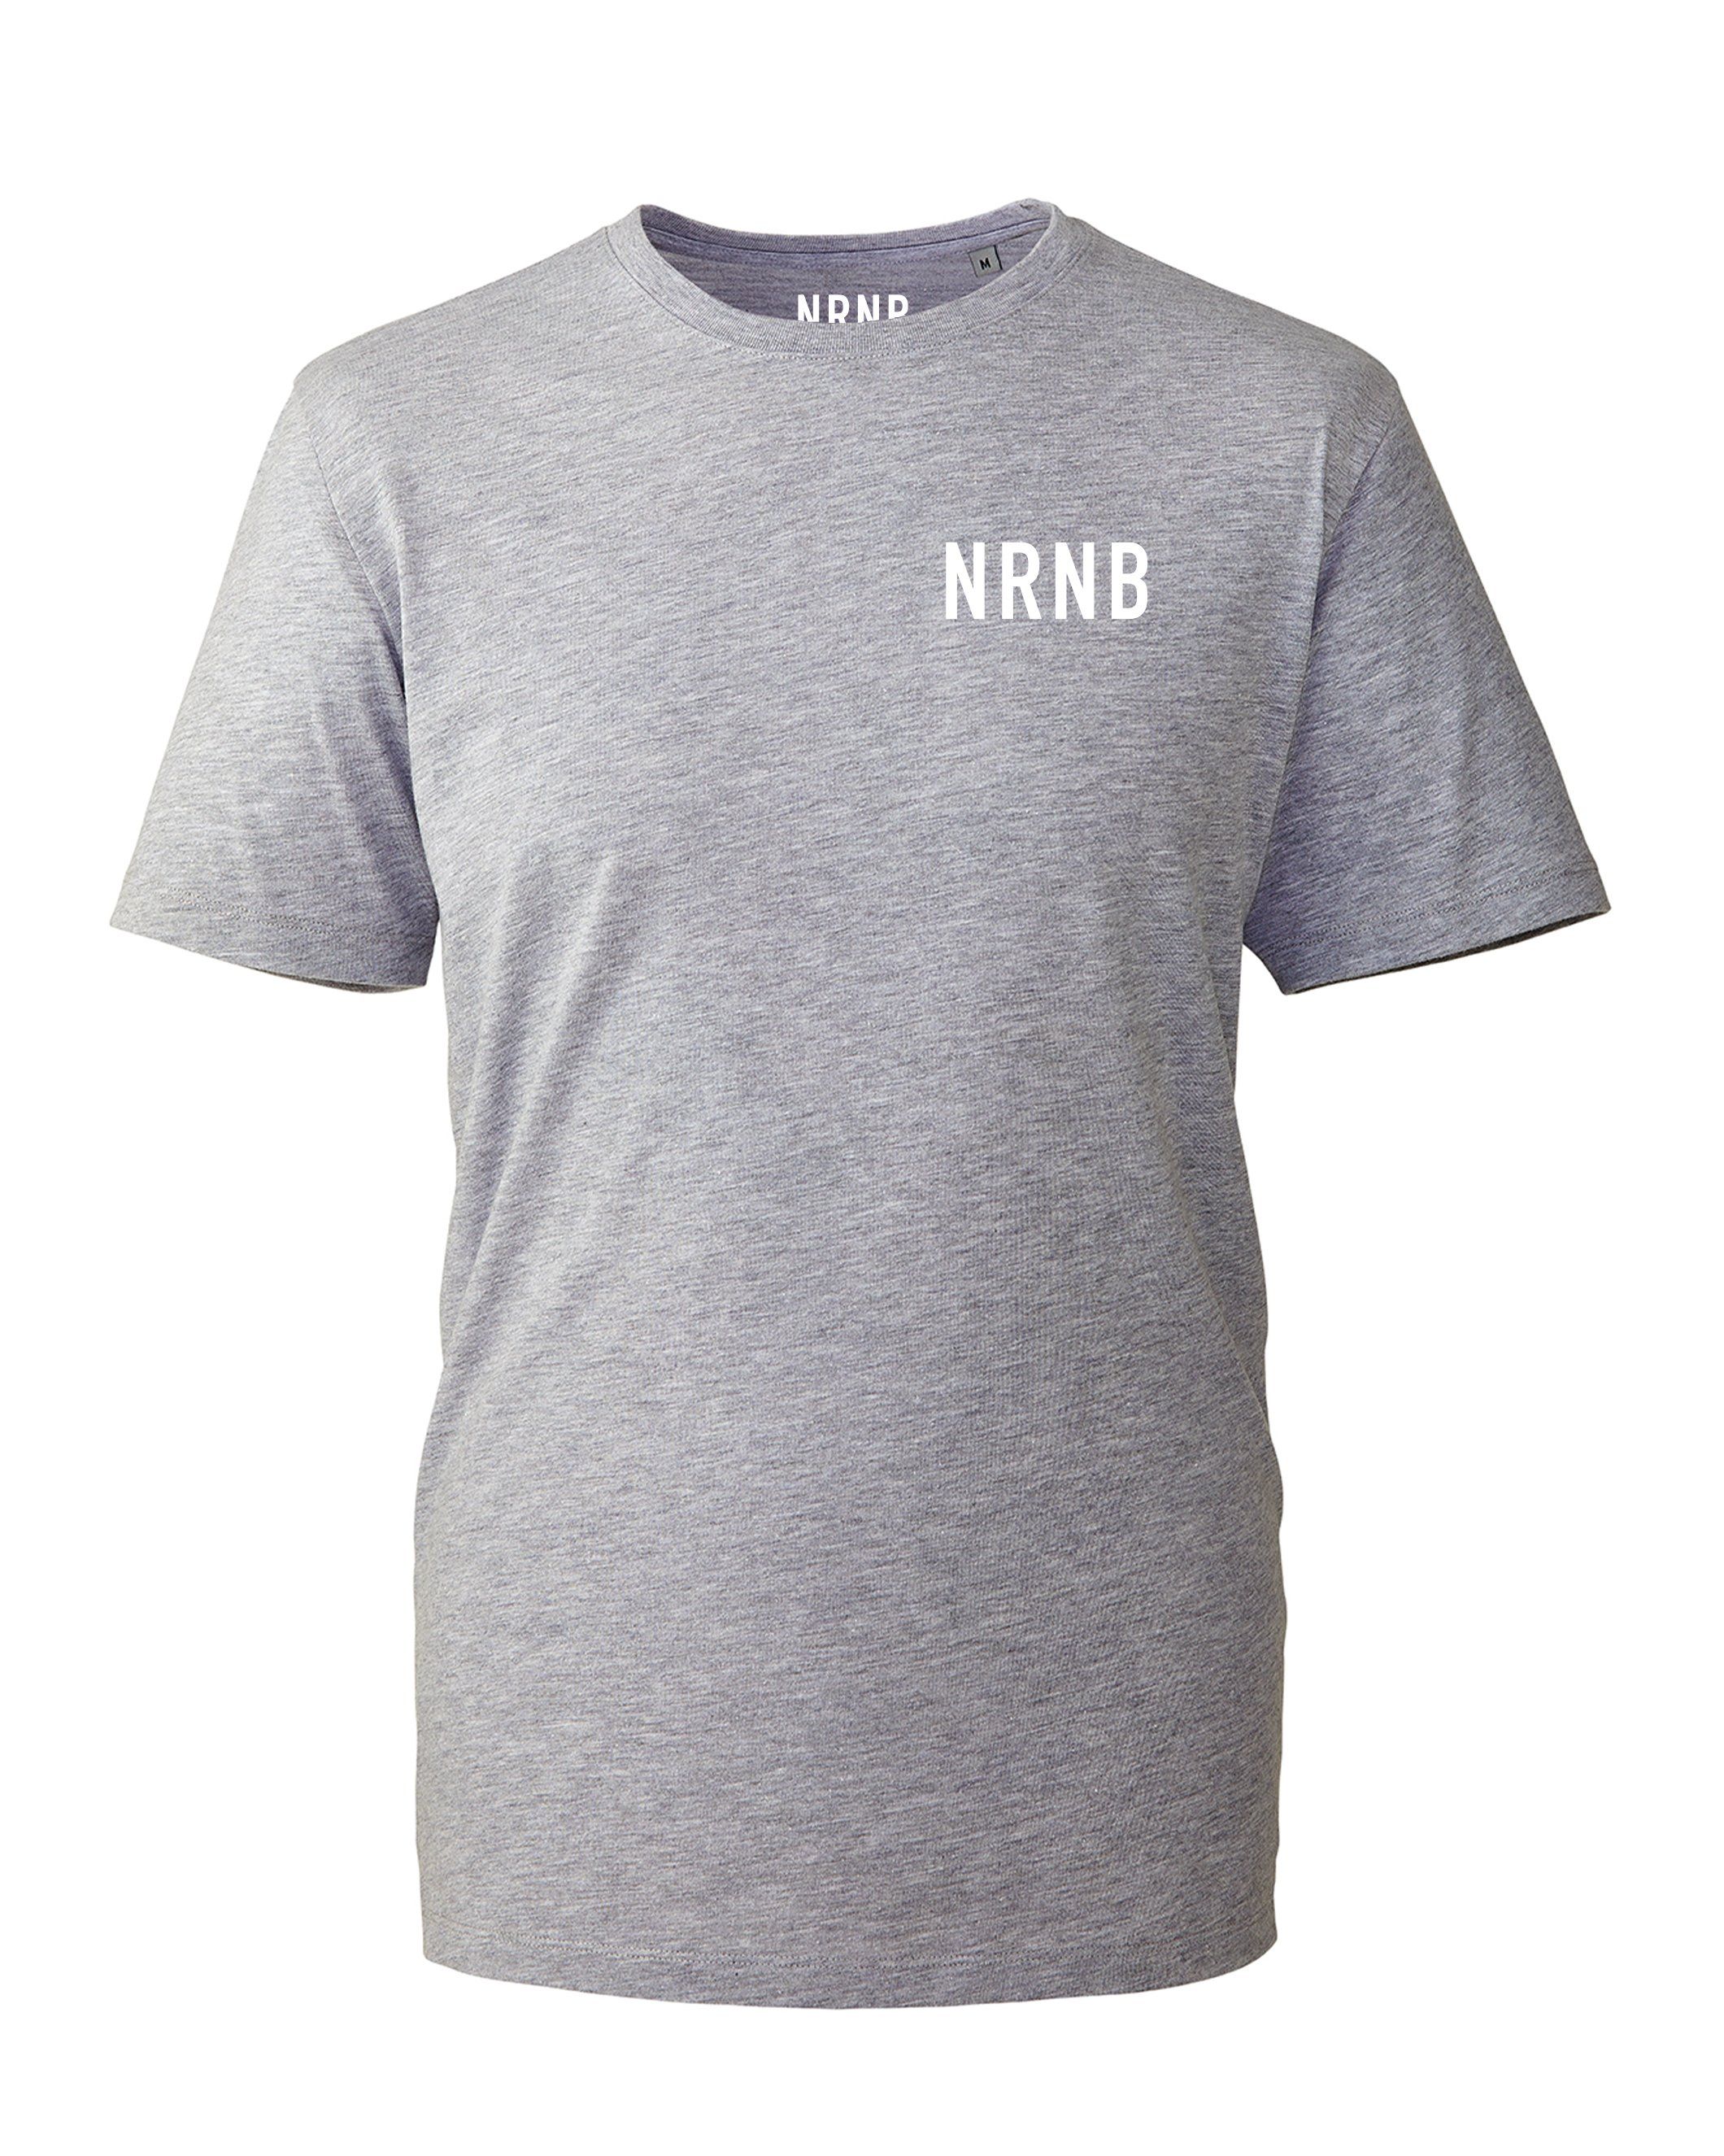 Our entry tee has an incredibly soft-feel finish and the ultimate ribbed crew neck. All with chain stitch detailing on the shoulders and nape of the nec,. Wear it to perfection. Fashion fit.  Soft-feel finish.  Ribbed crew neck.  100% Organic cotton. 145gsm. S-34/36, M-38/40, L-42/44, XL-46/48, 2XL-50/52, 3XL-54/129